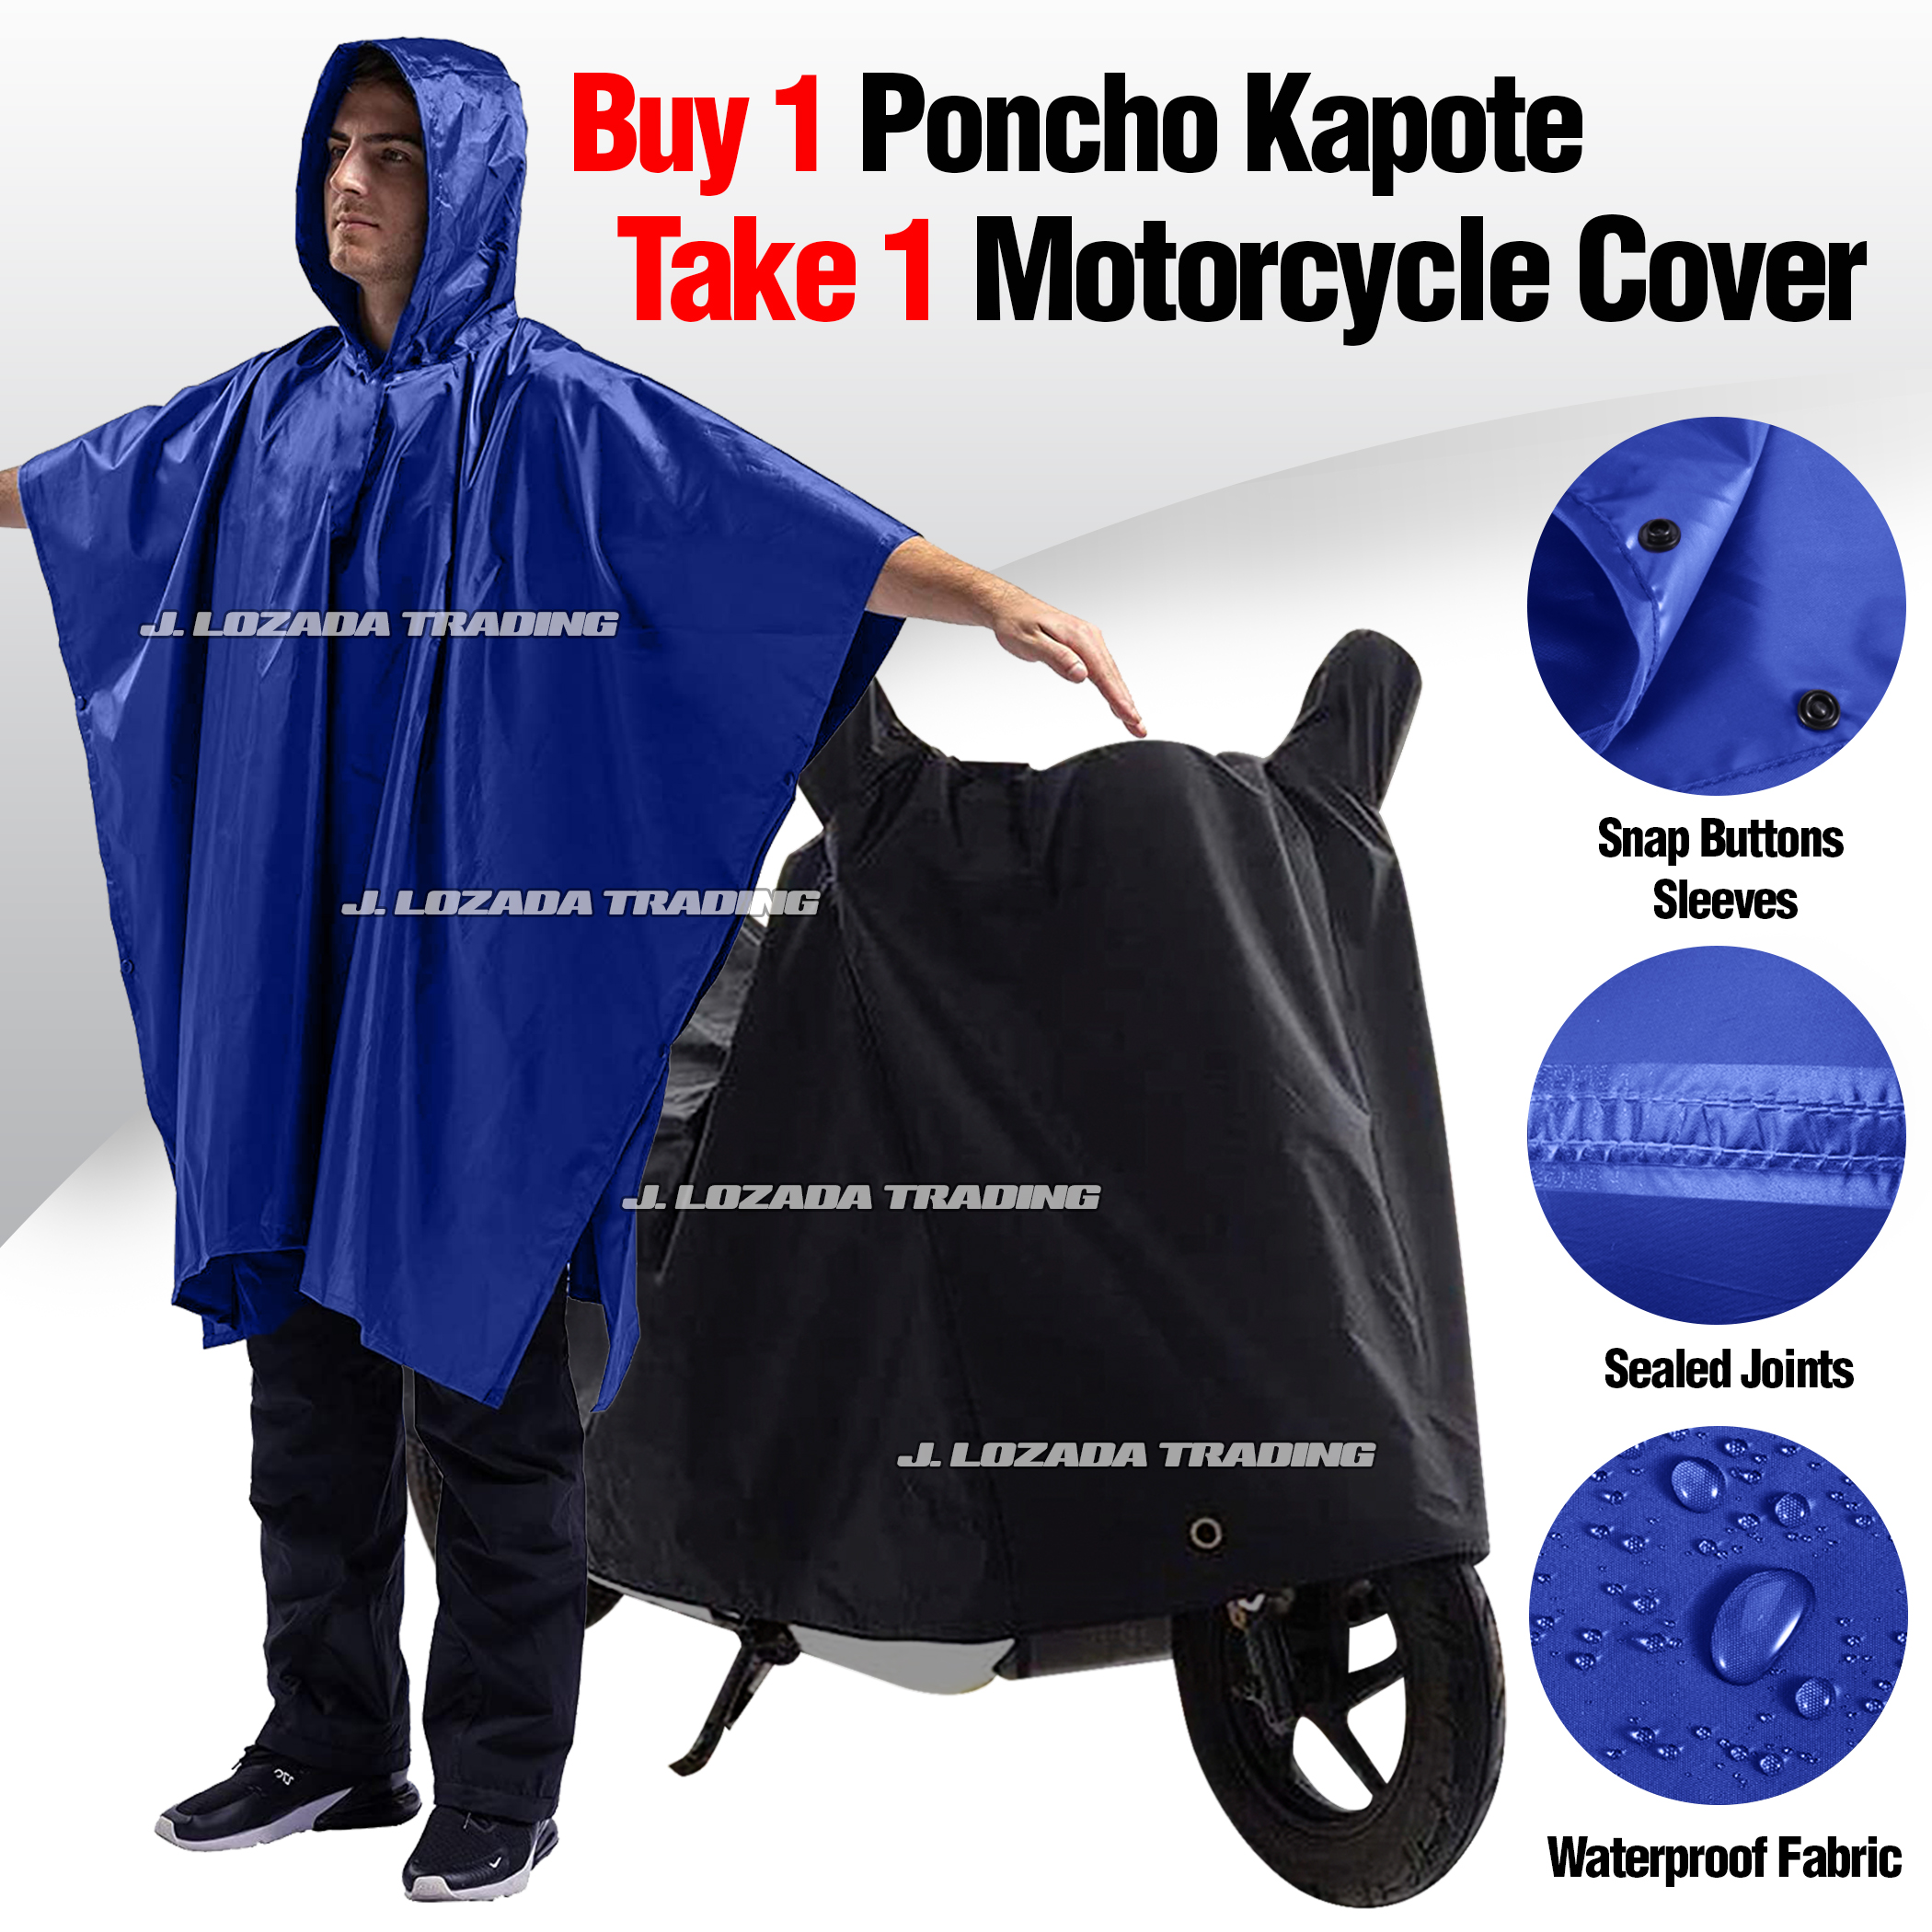 HIGH QUALITY RAINCOAT WITH MOTORCYCLE COVER, KAPOTE, VULCANIZE STITCH ...